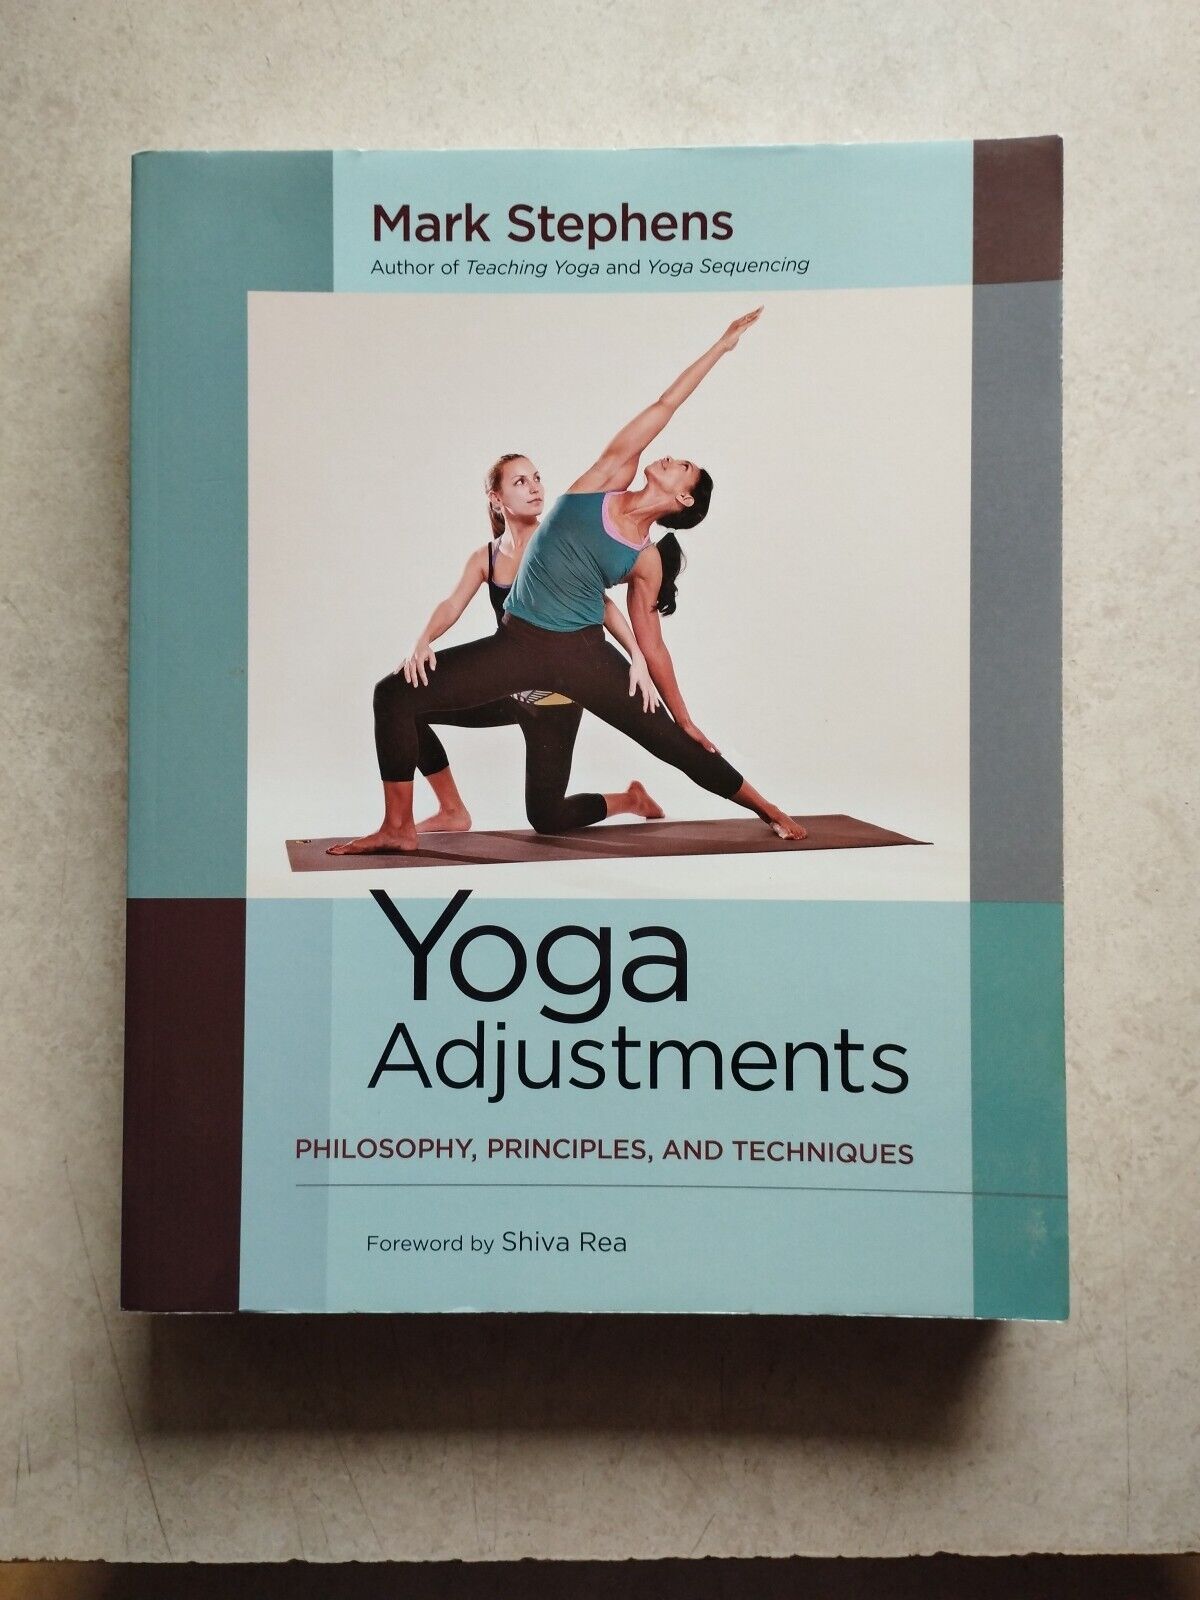 https://misterbookman.com.au/wp-content/uploads/imported/0/Yoga-Adjustments-Philosophy-Principles-and-Techniques-by-Mark-Stephens-225804870920.jpg